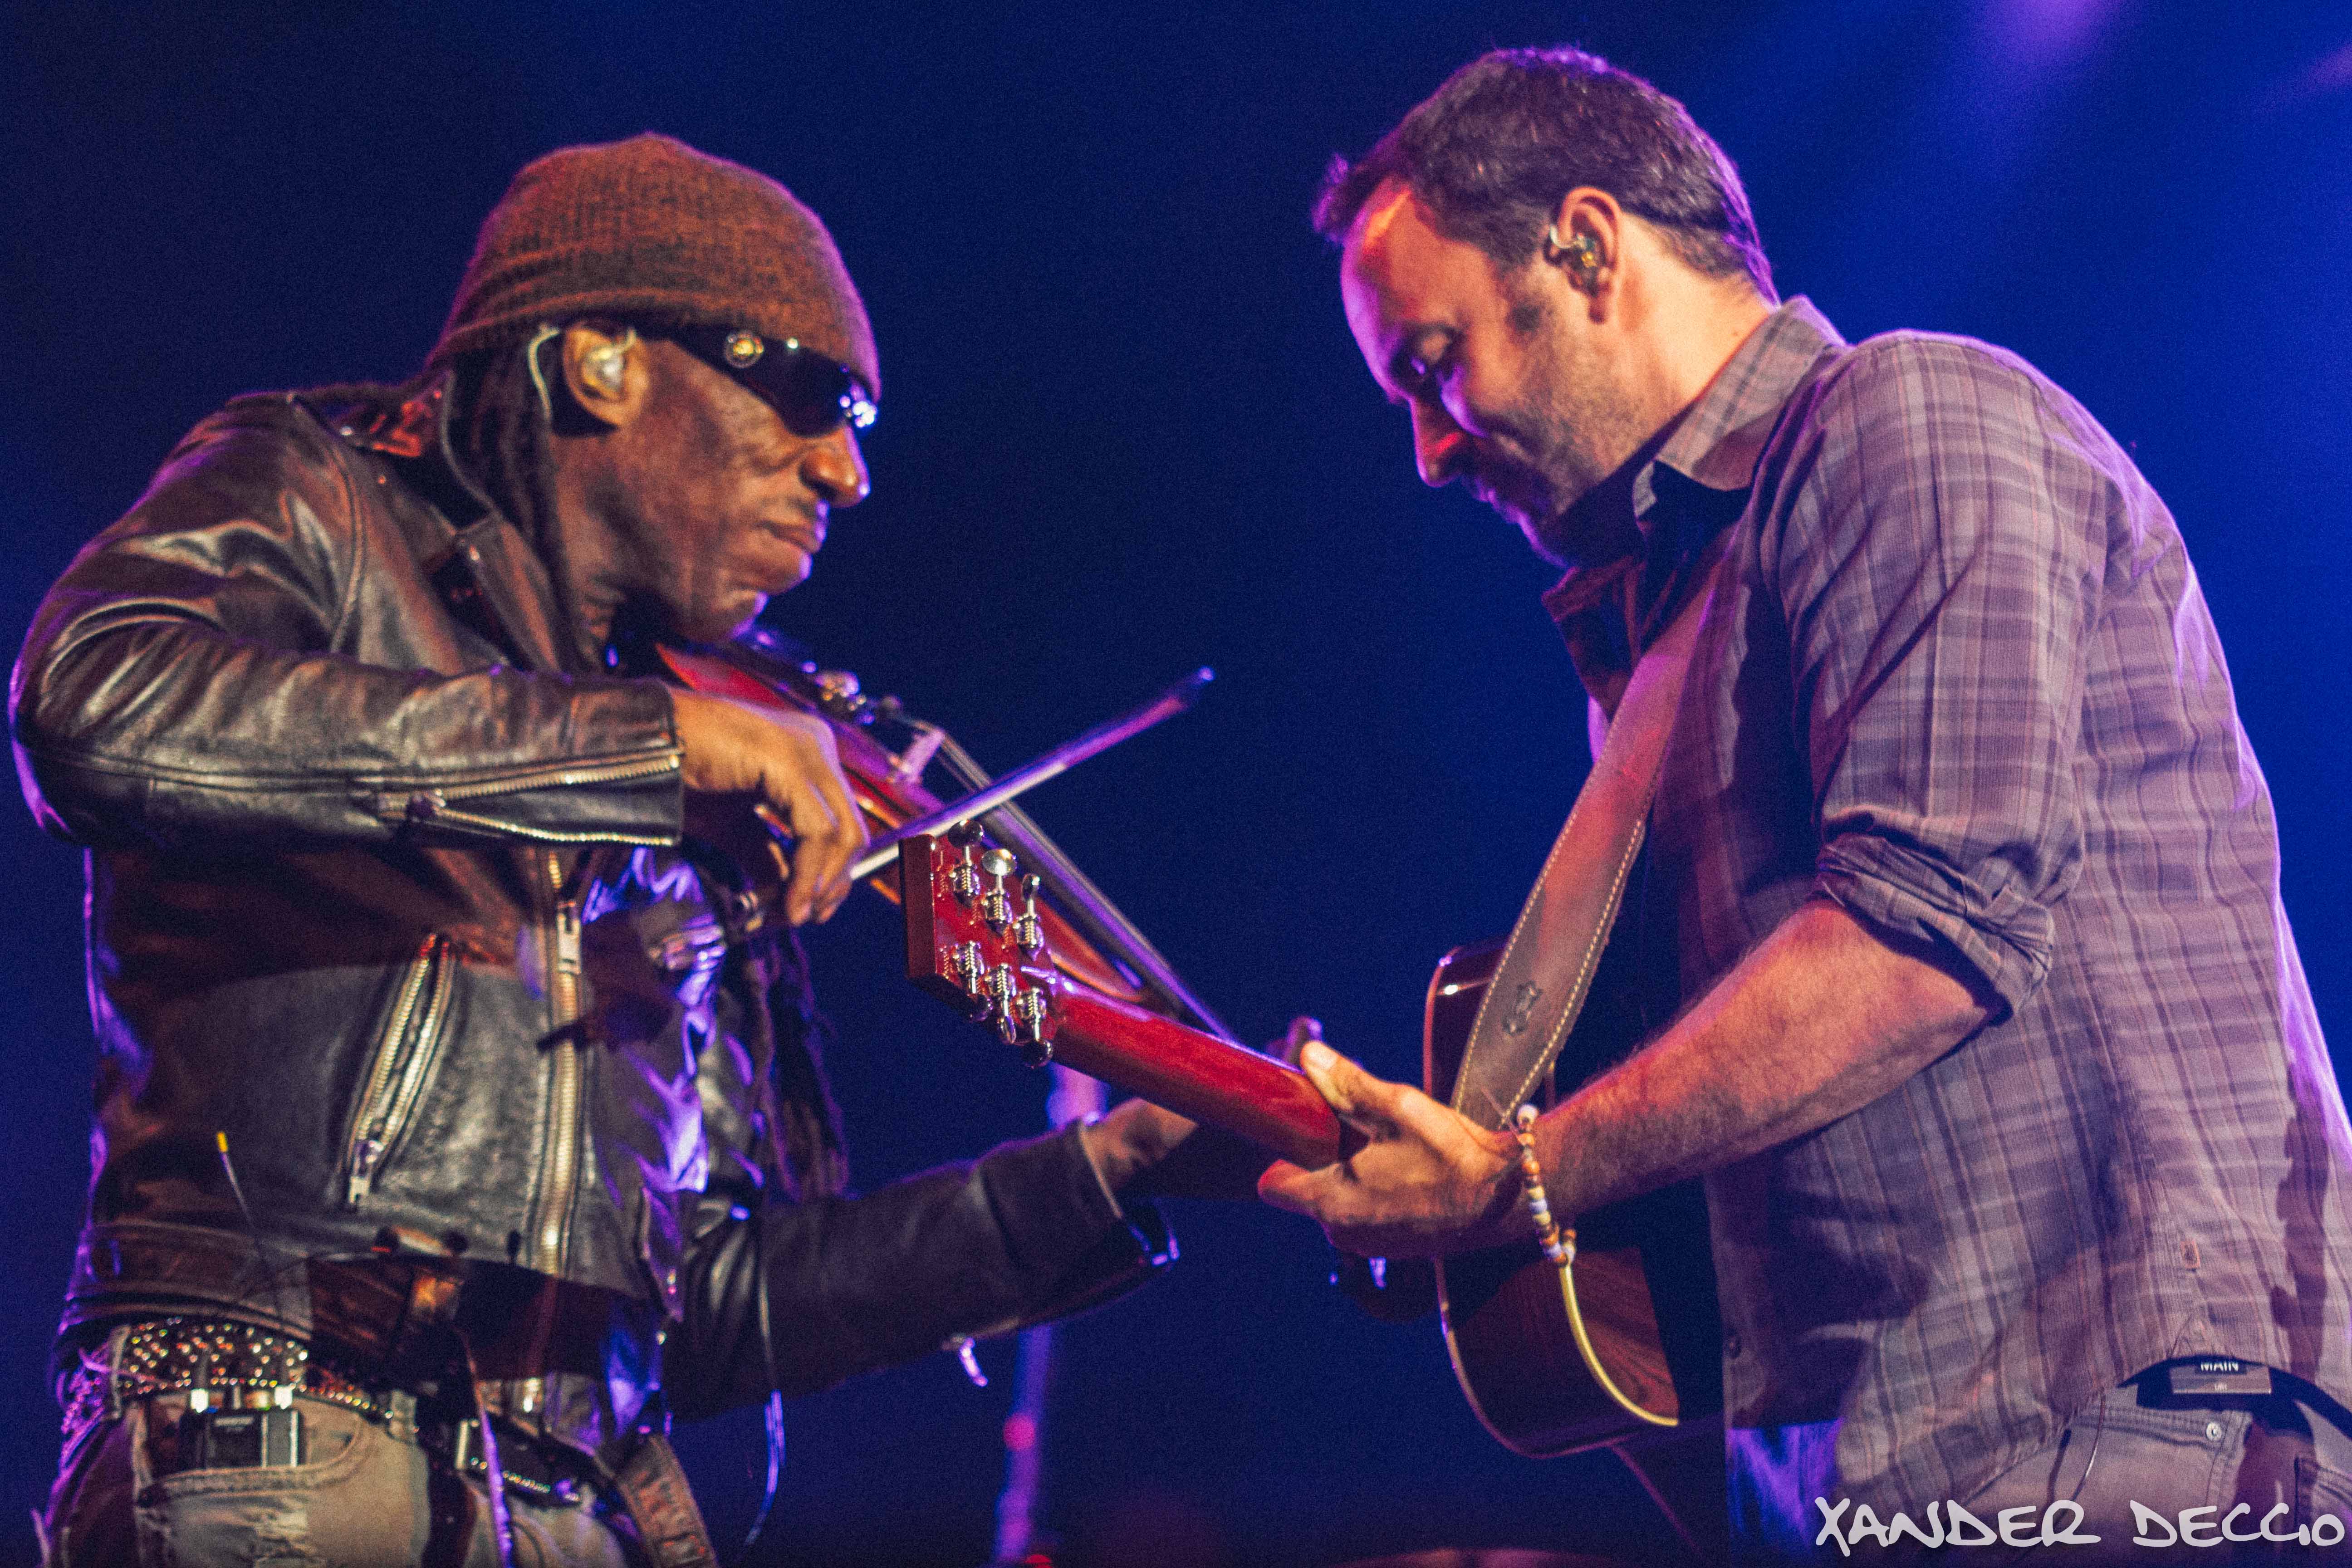 Boyd Tinsley and Dave Matthews of Dave Matthews Band jam out during their show at The Gorge. Photo by Xander Deccio